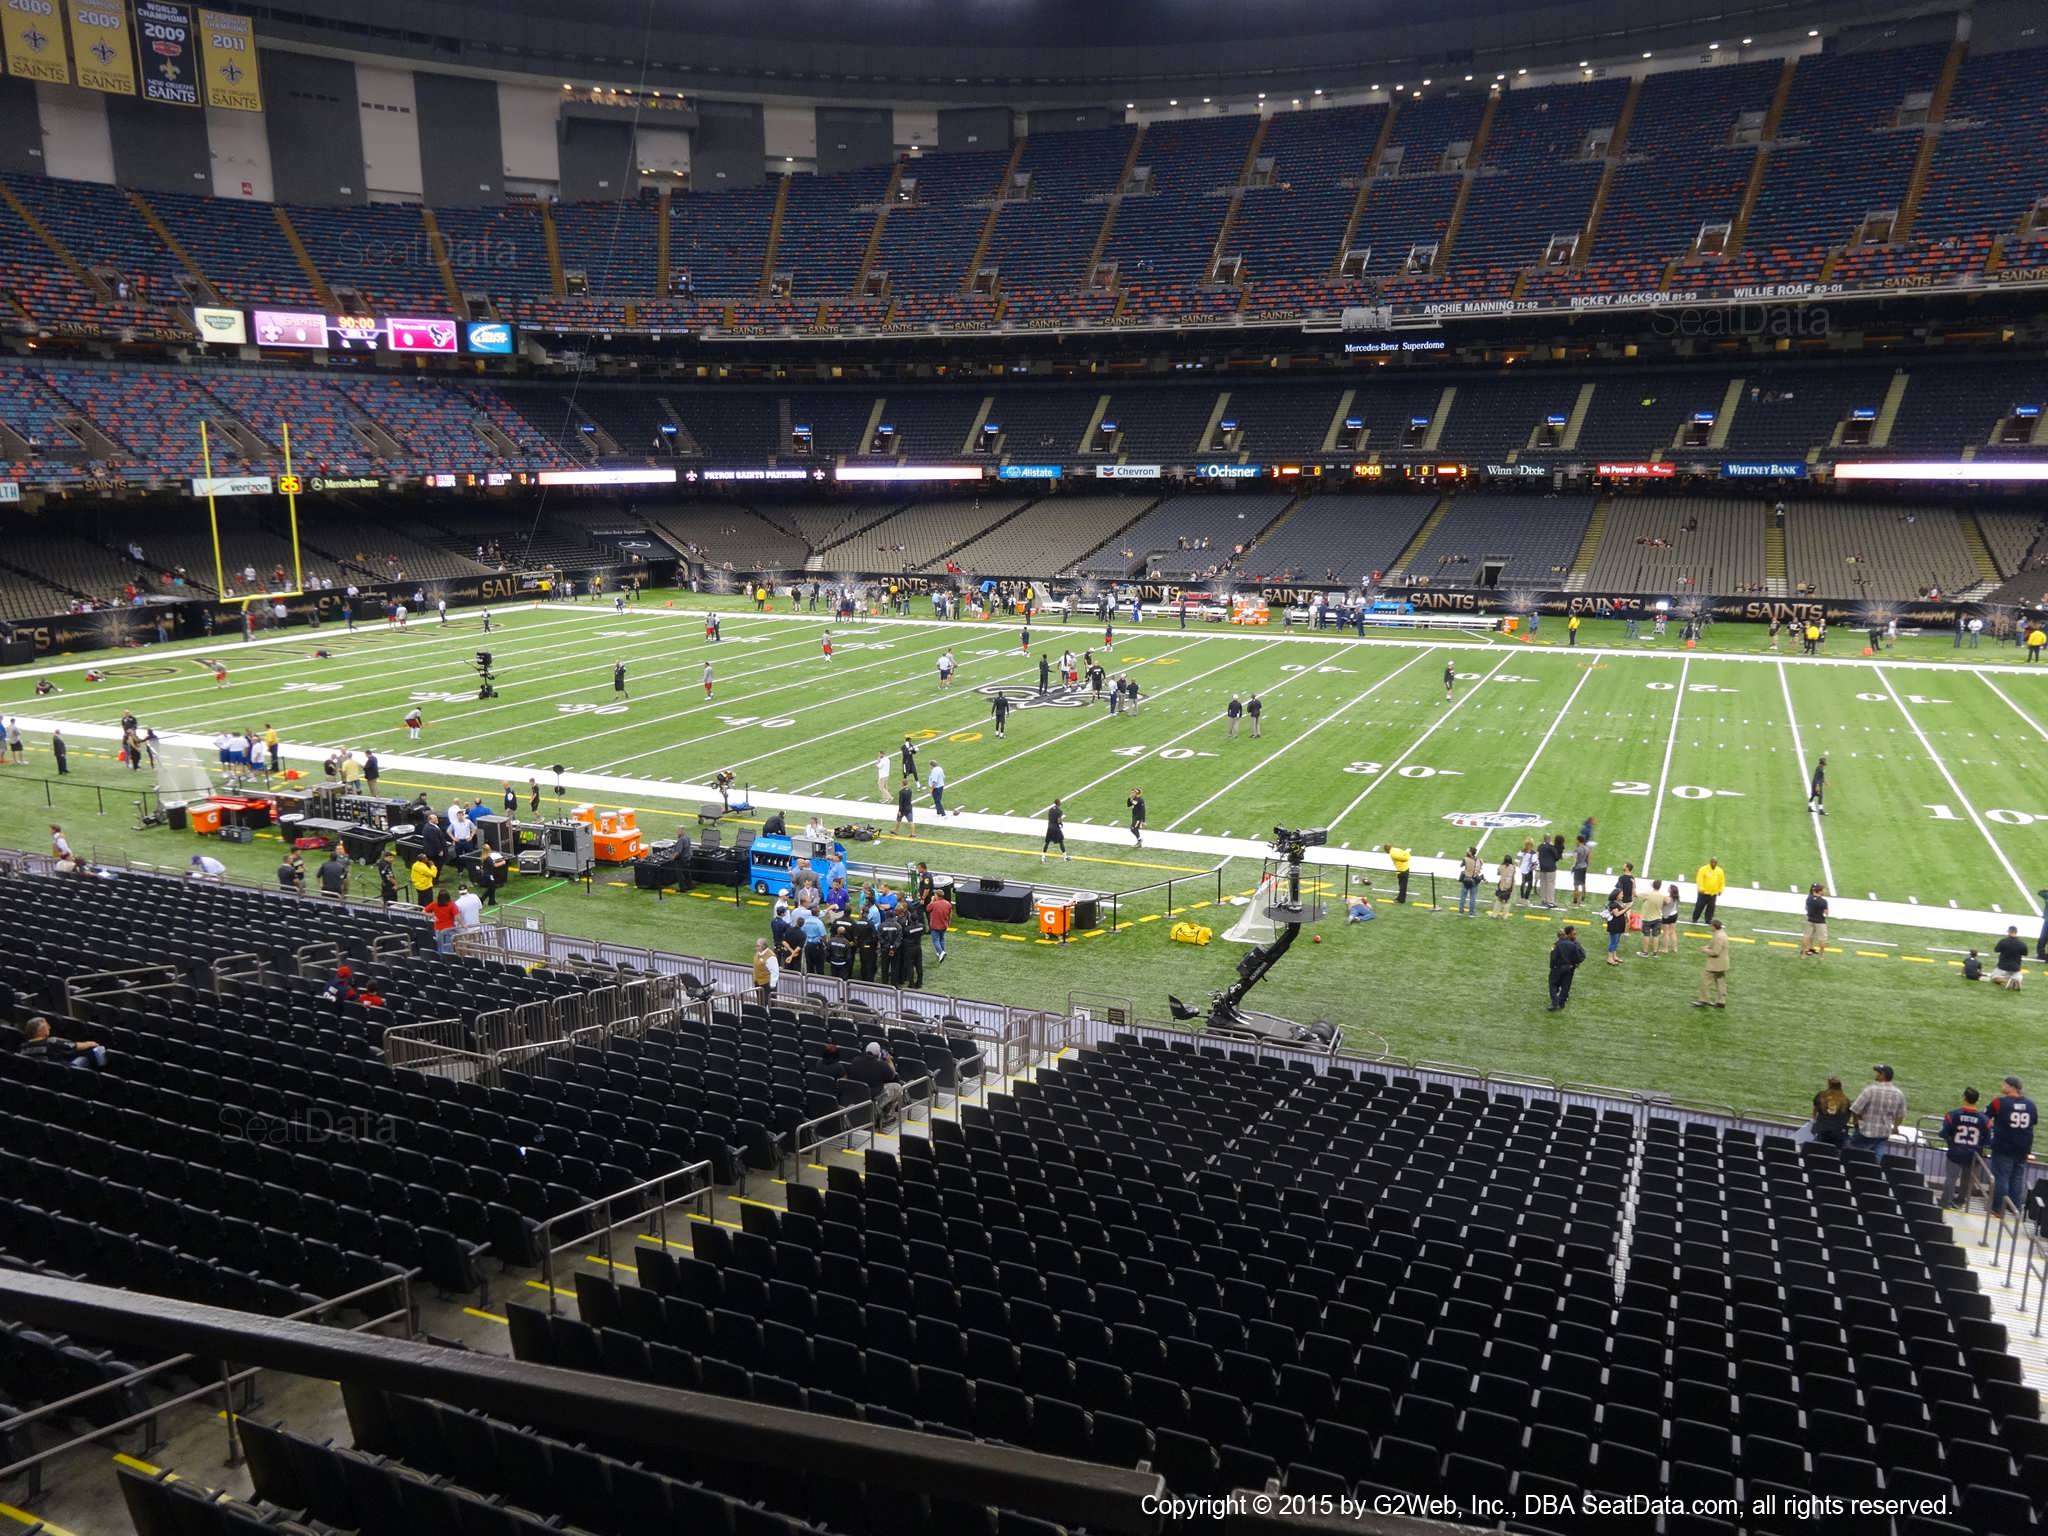 Seat view from section 259 at the Mercedes-Benz Superdome, home of the New Orleans Saints